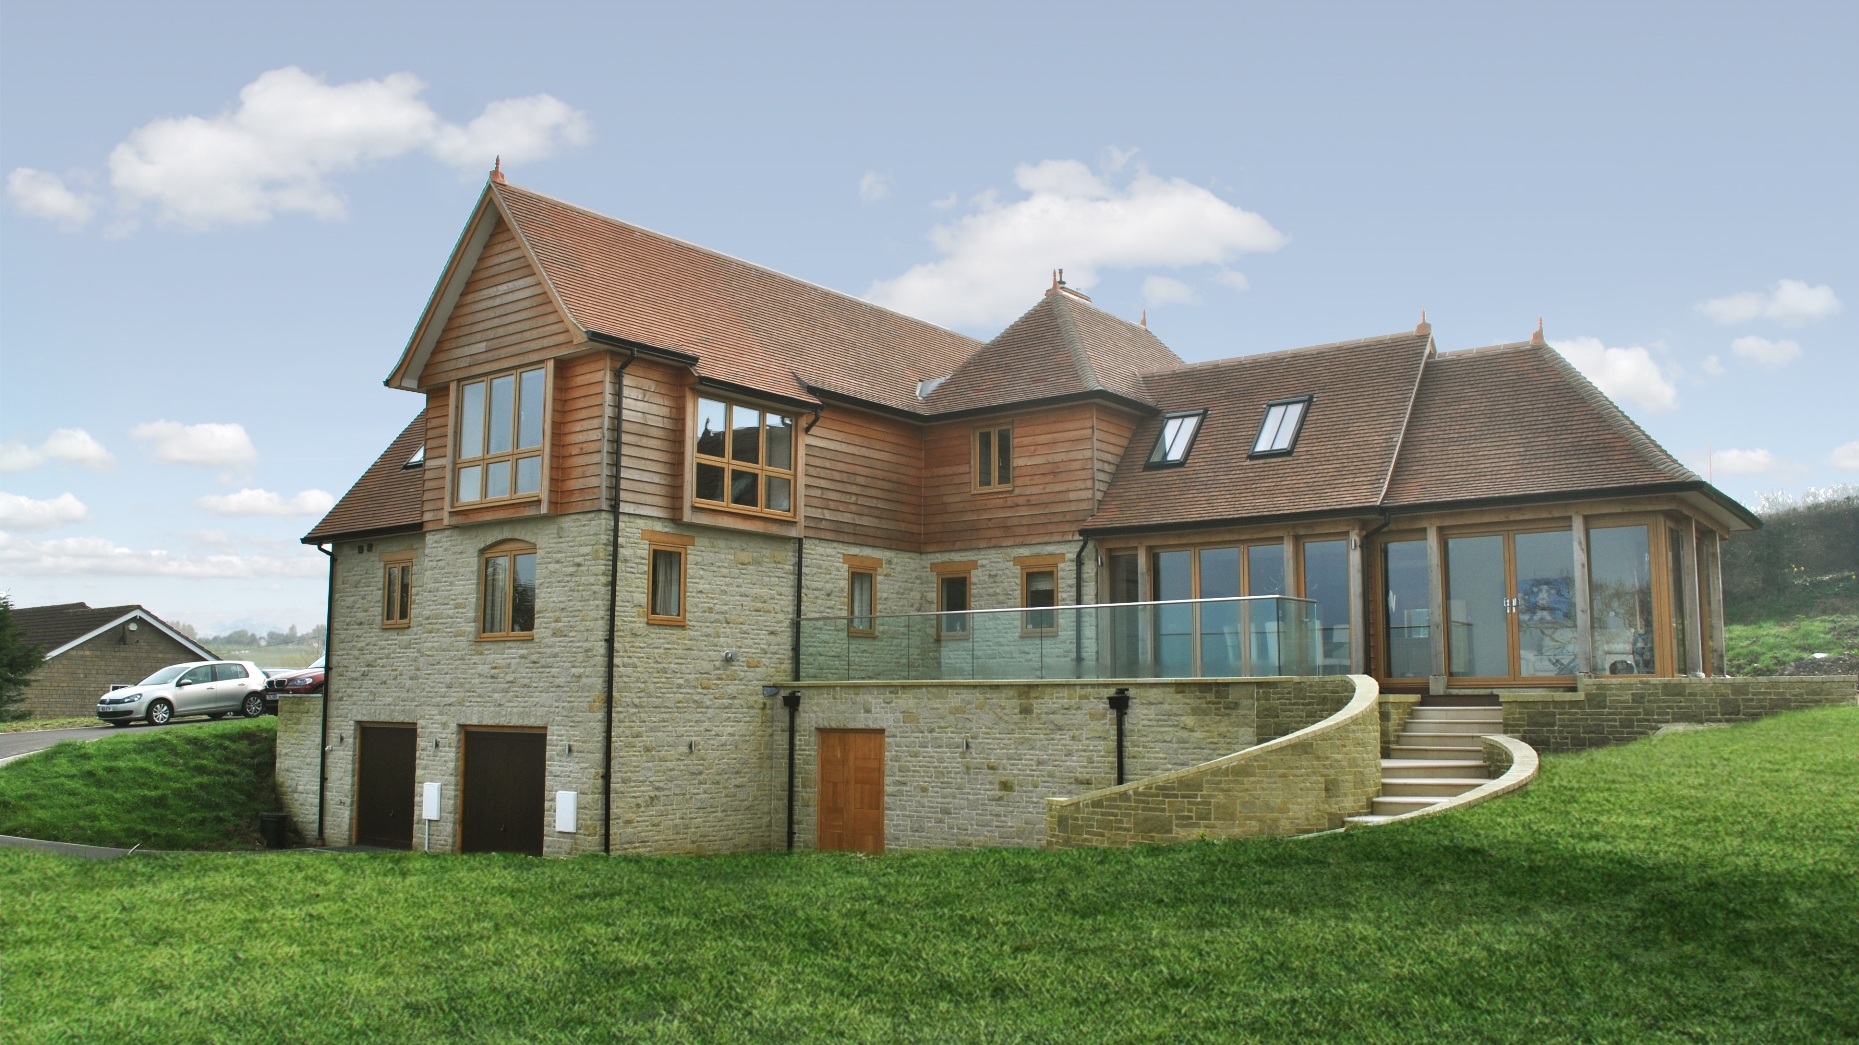 New Dwelling for private client, Shaftesbury